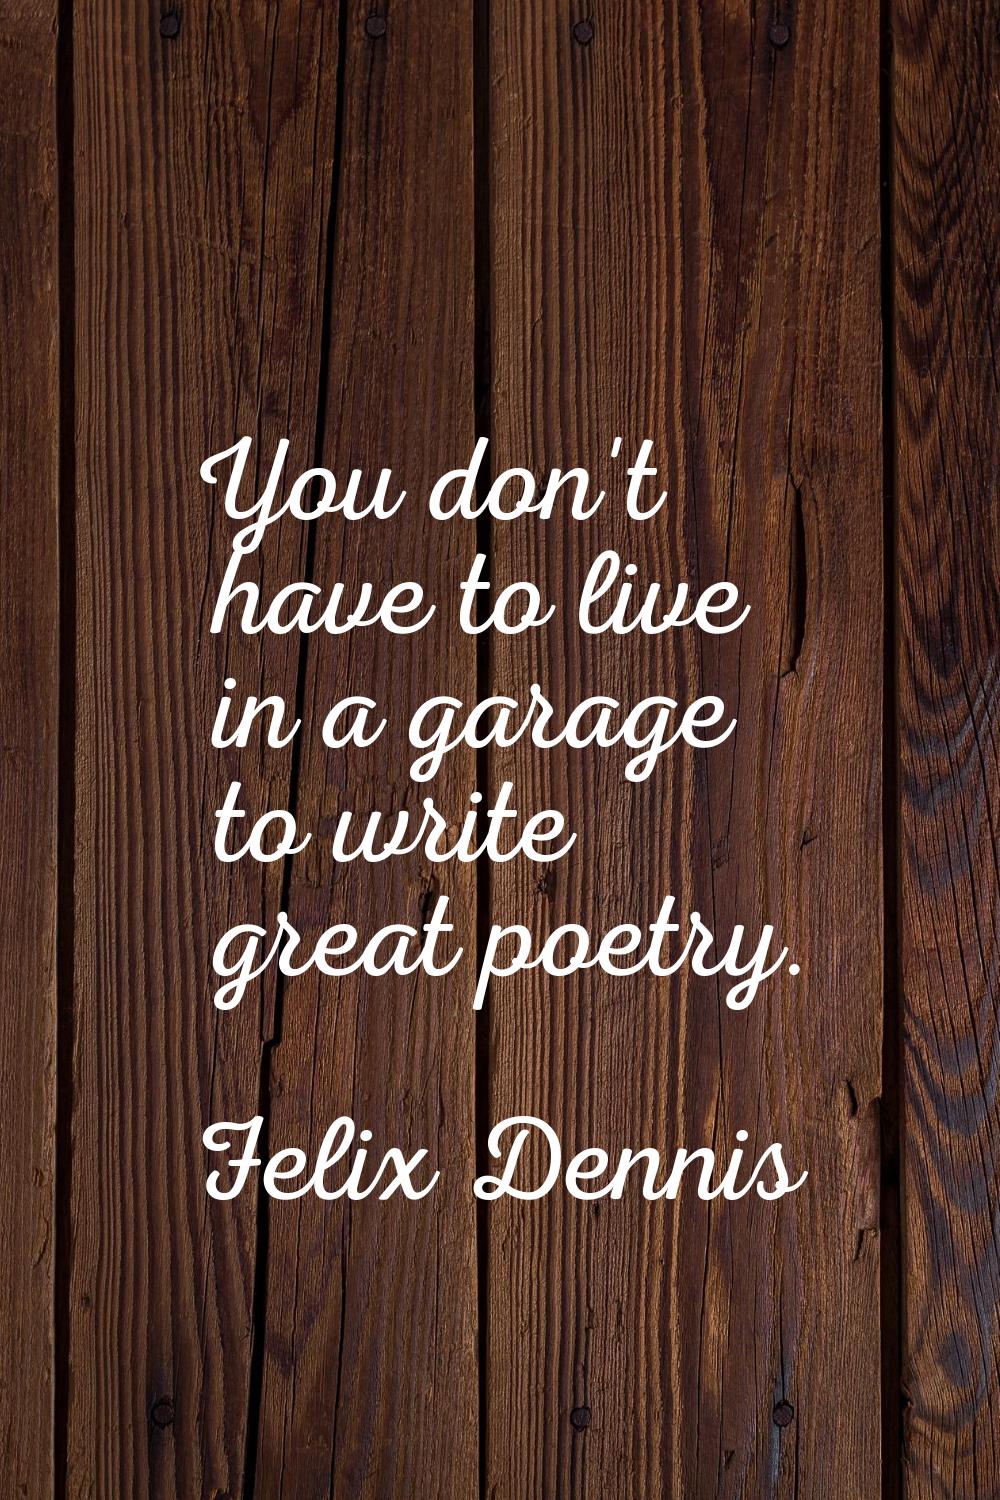 You don't have to live in a garage to write great poetry.